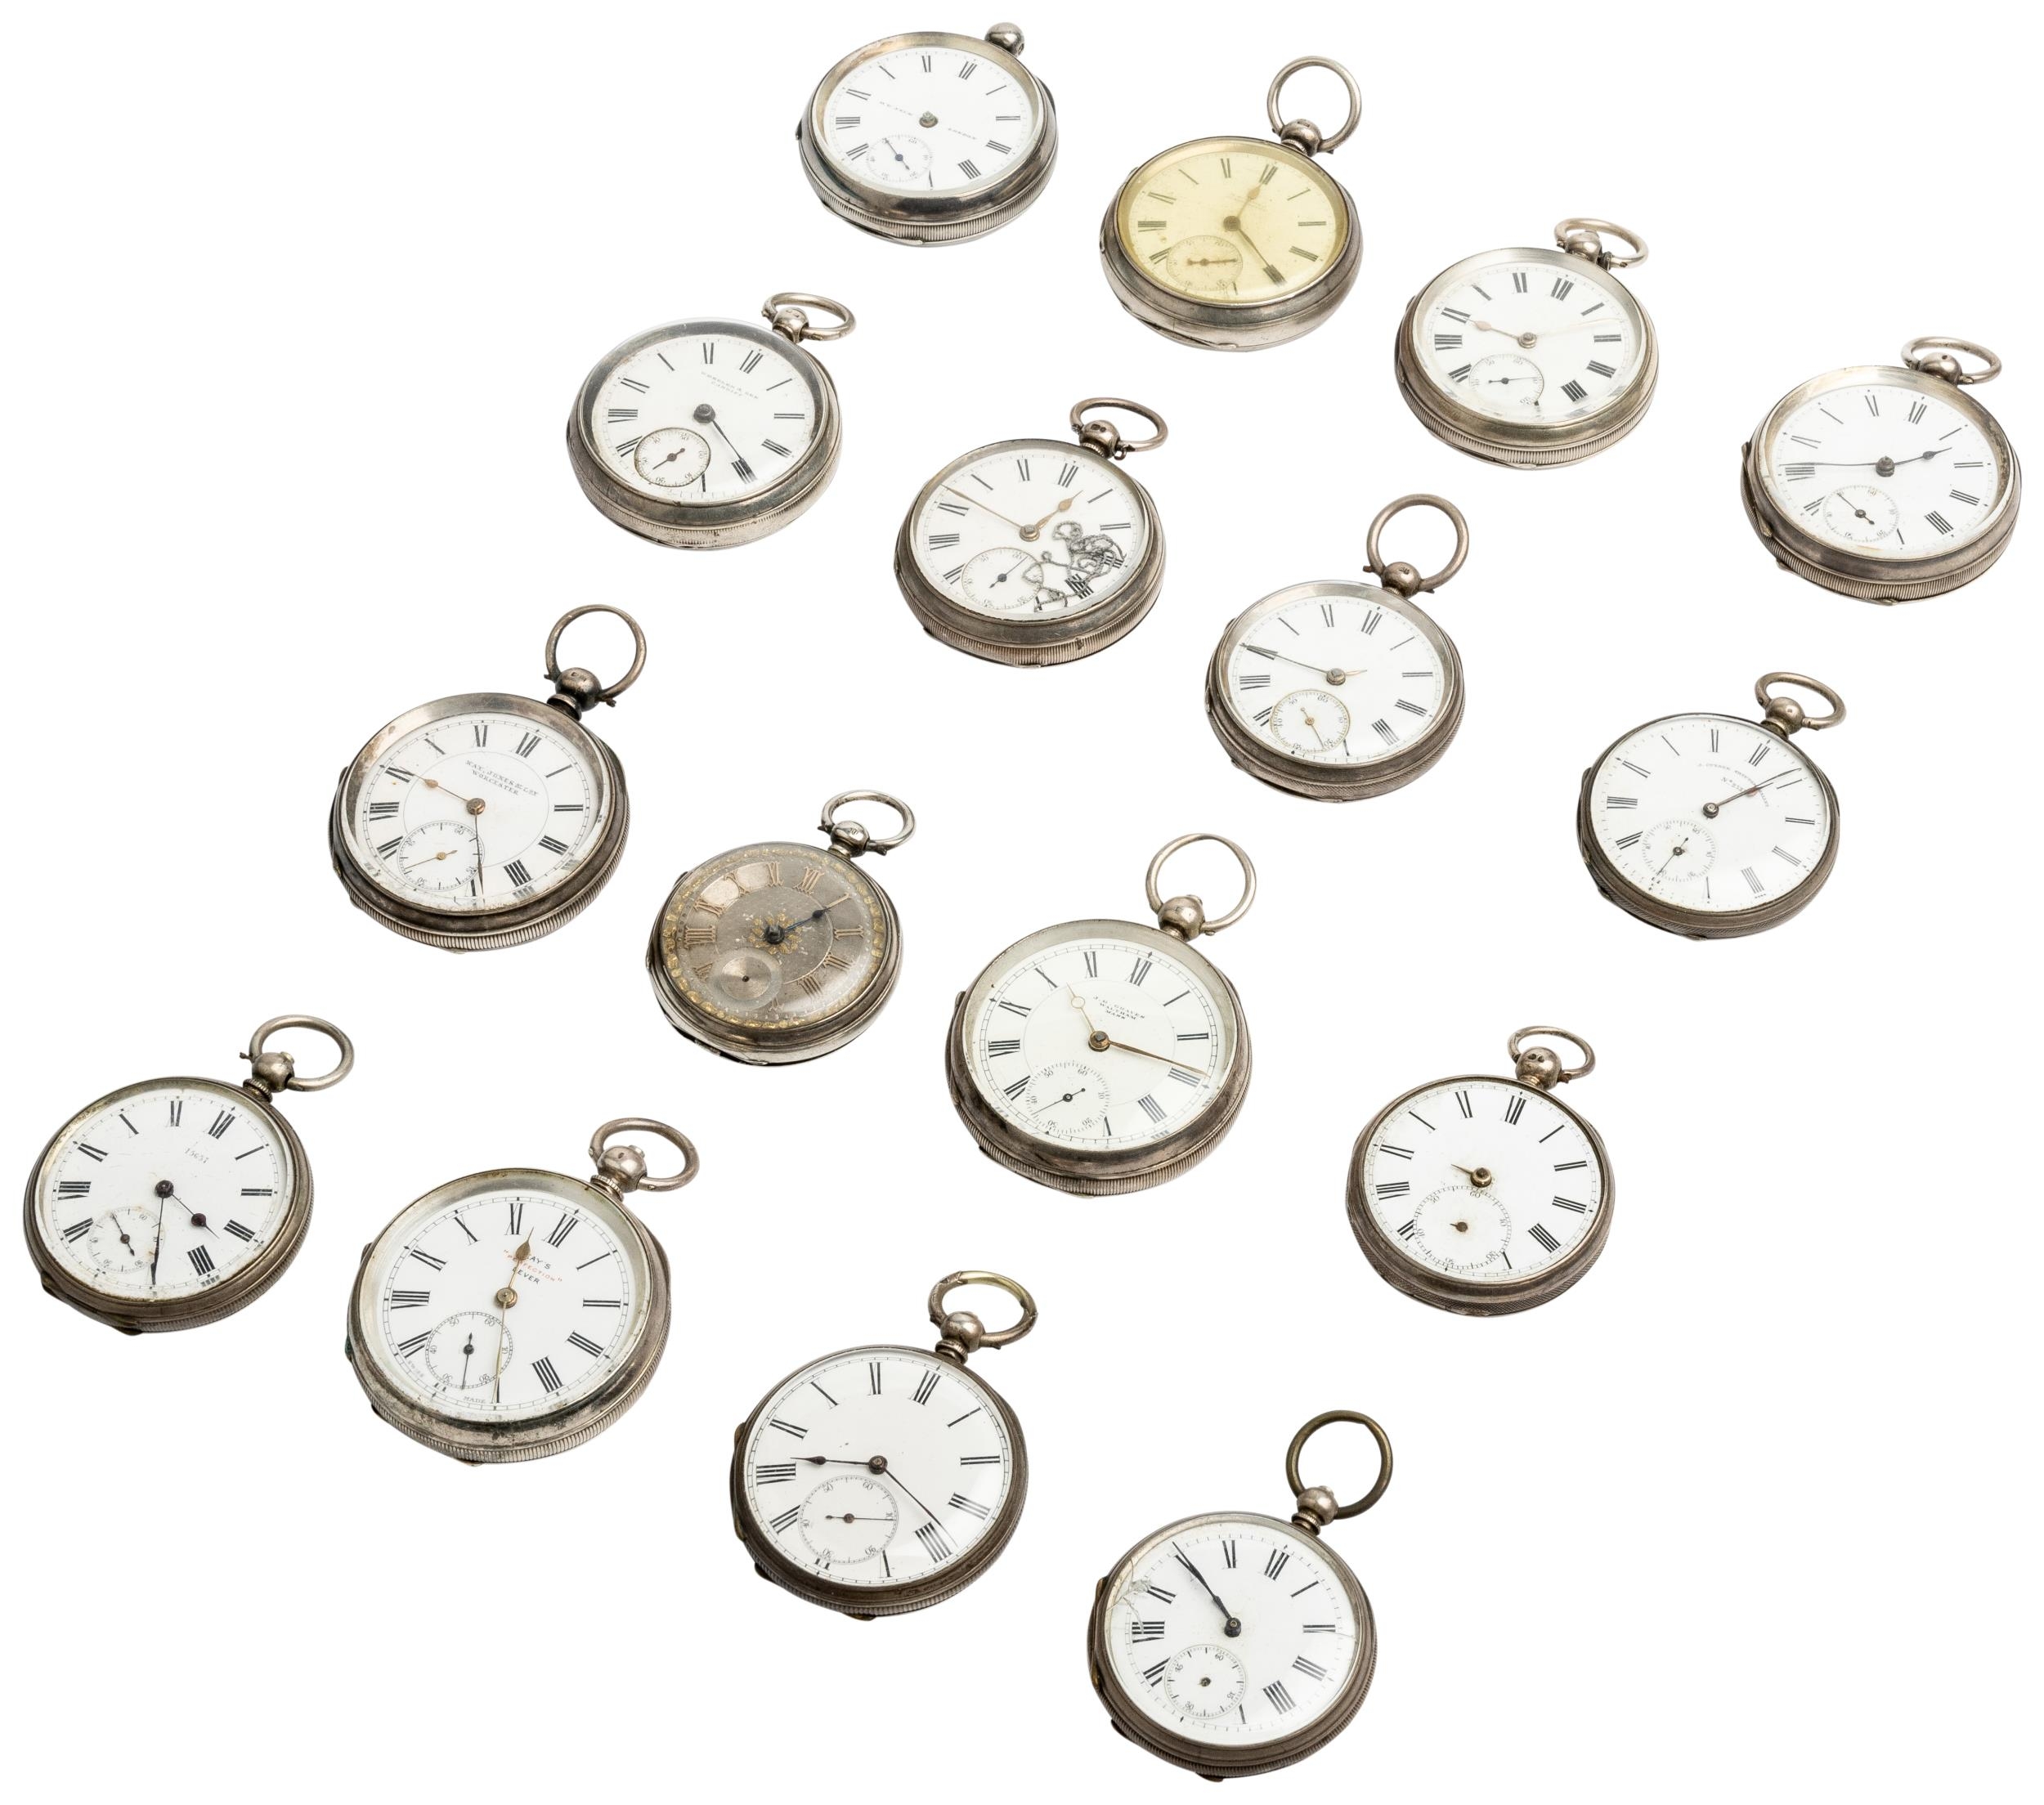 TEN ENGLISH SILVER CASED WATCHES and six Swiss Silver Watches. A/F (16) - Image 2 of 2